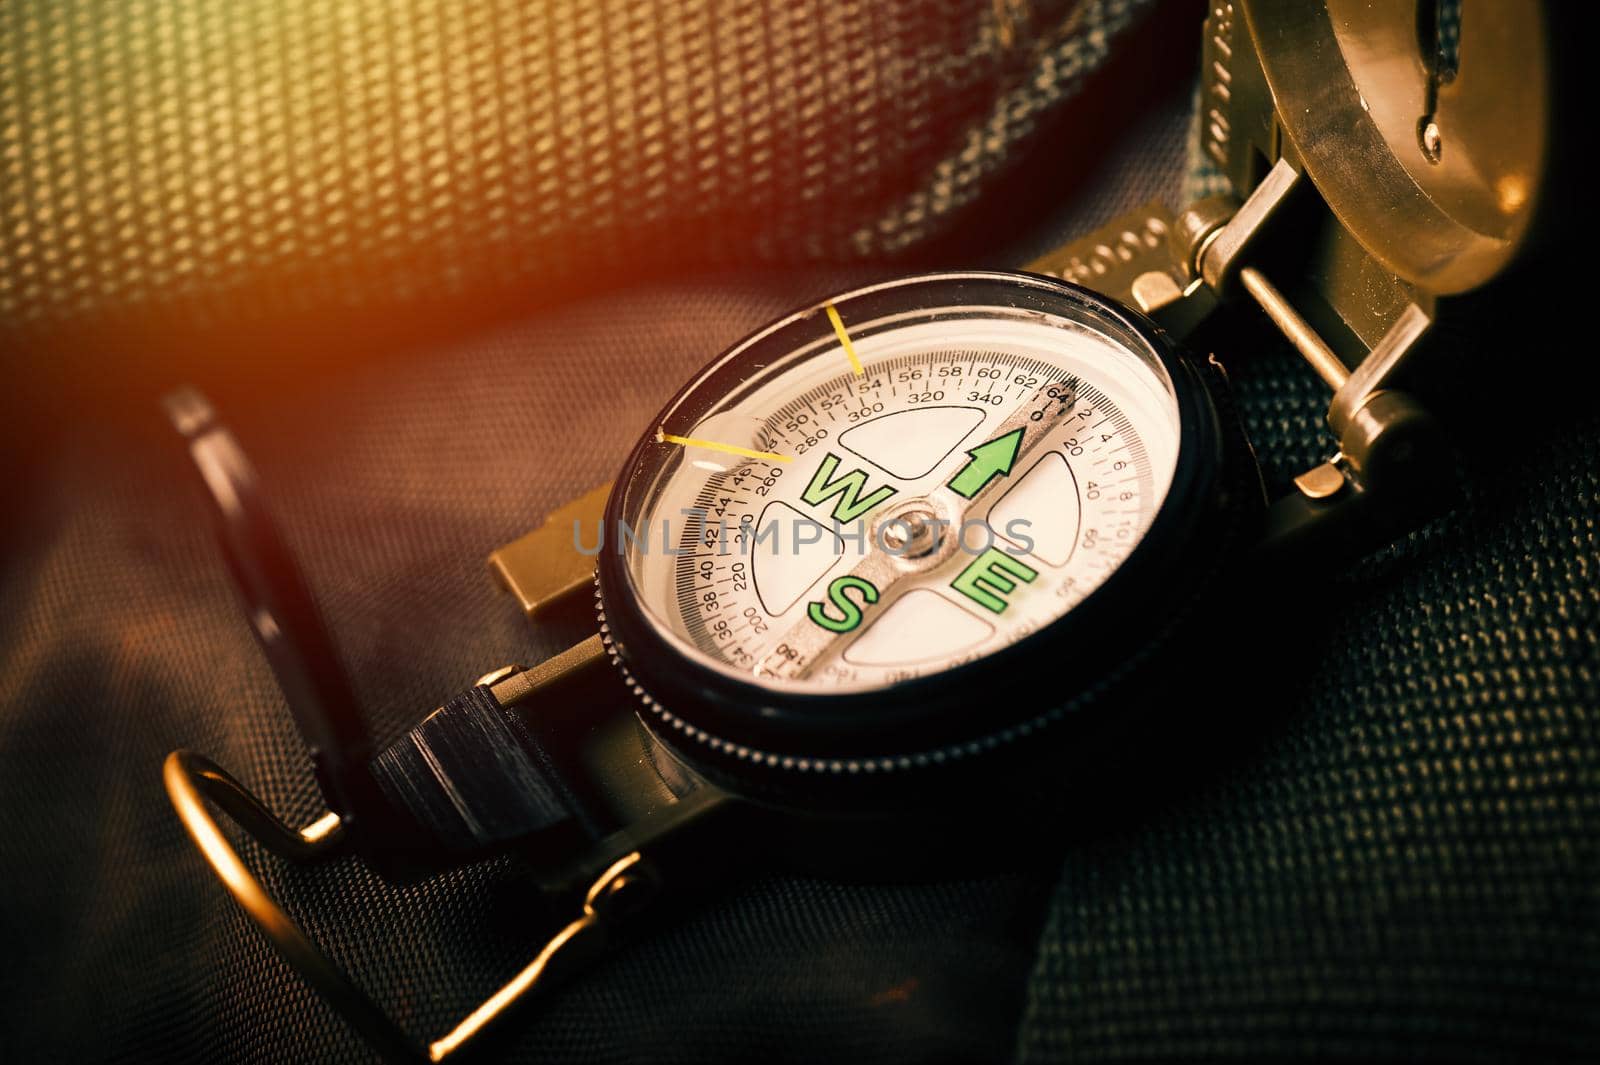 closeup military style of compass for military or camping.